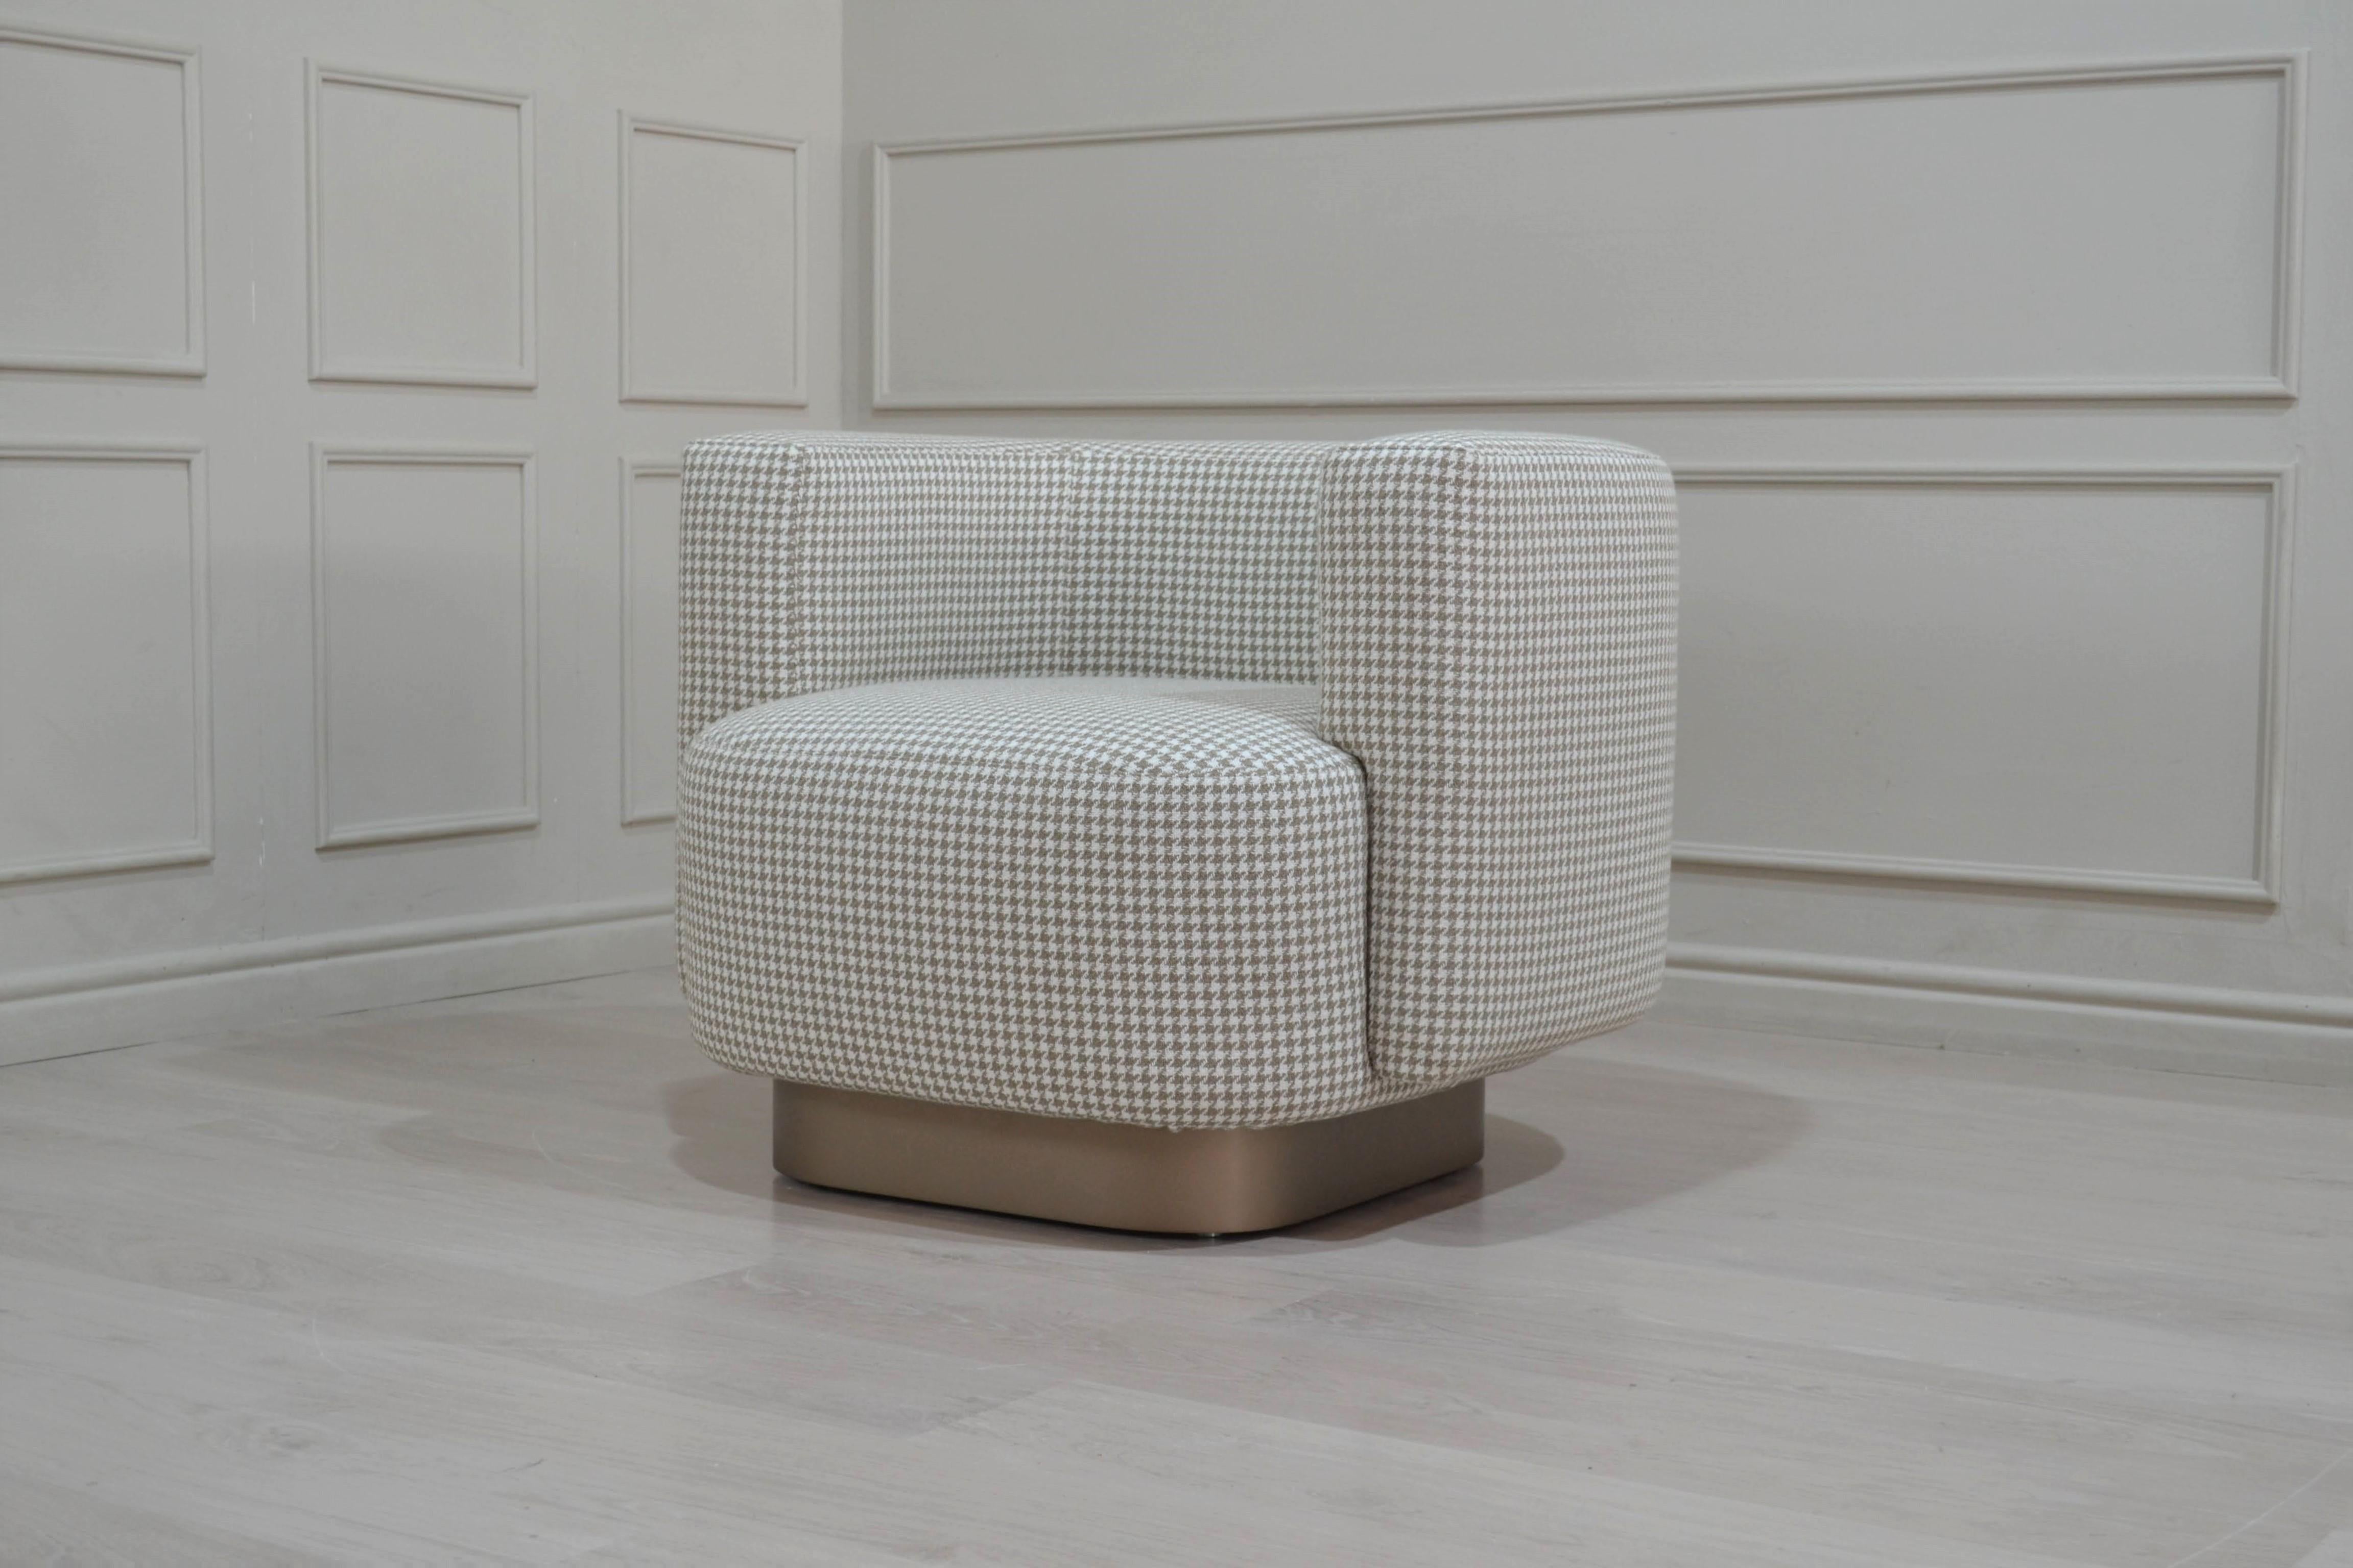 Italian Contemporary Lounge Upholstered Armchair in Gingham Pattern Fabric  In New Condition For Sale In San Pietro di Morubio, Verona